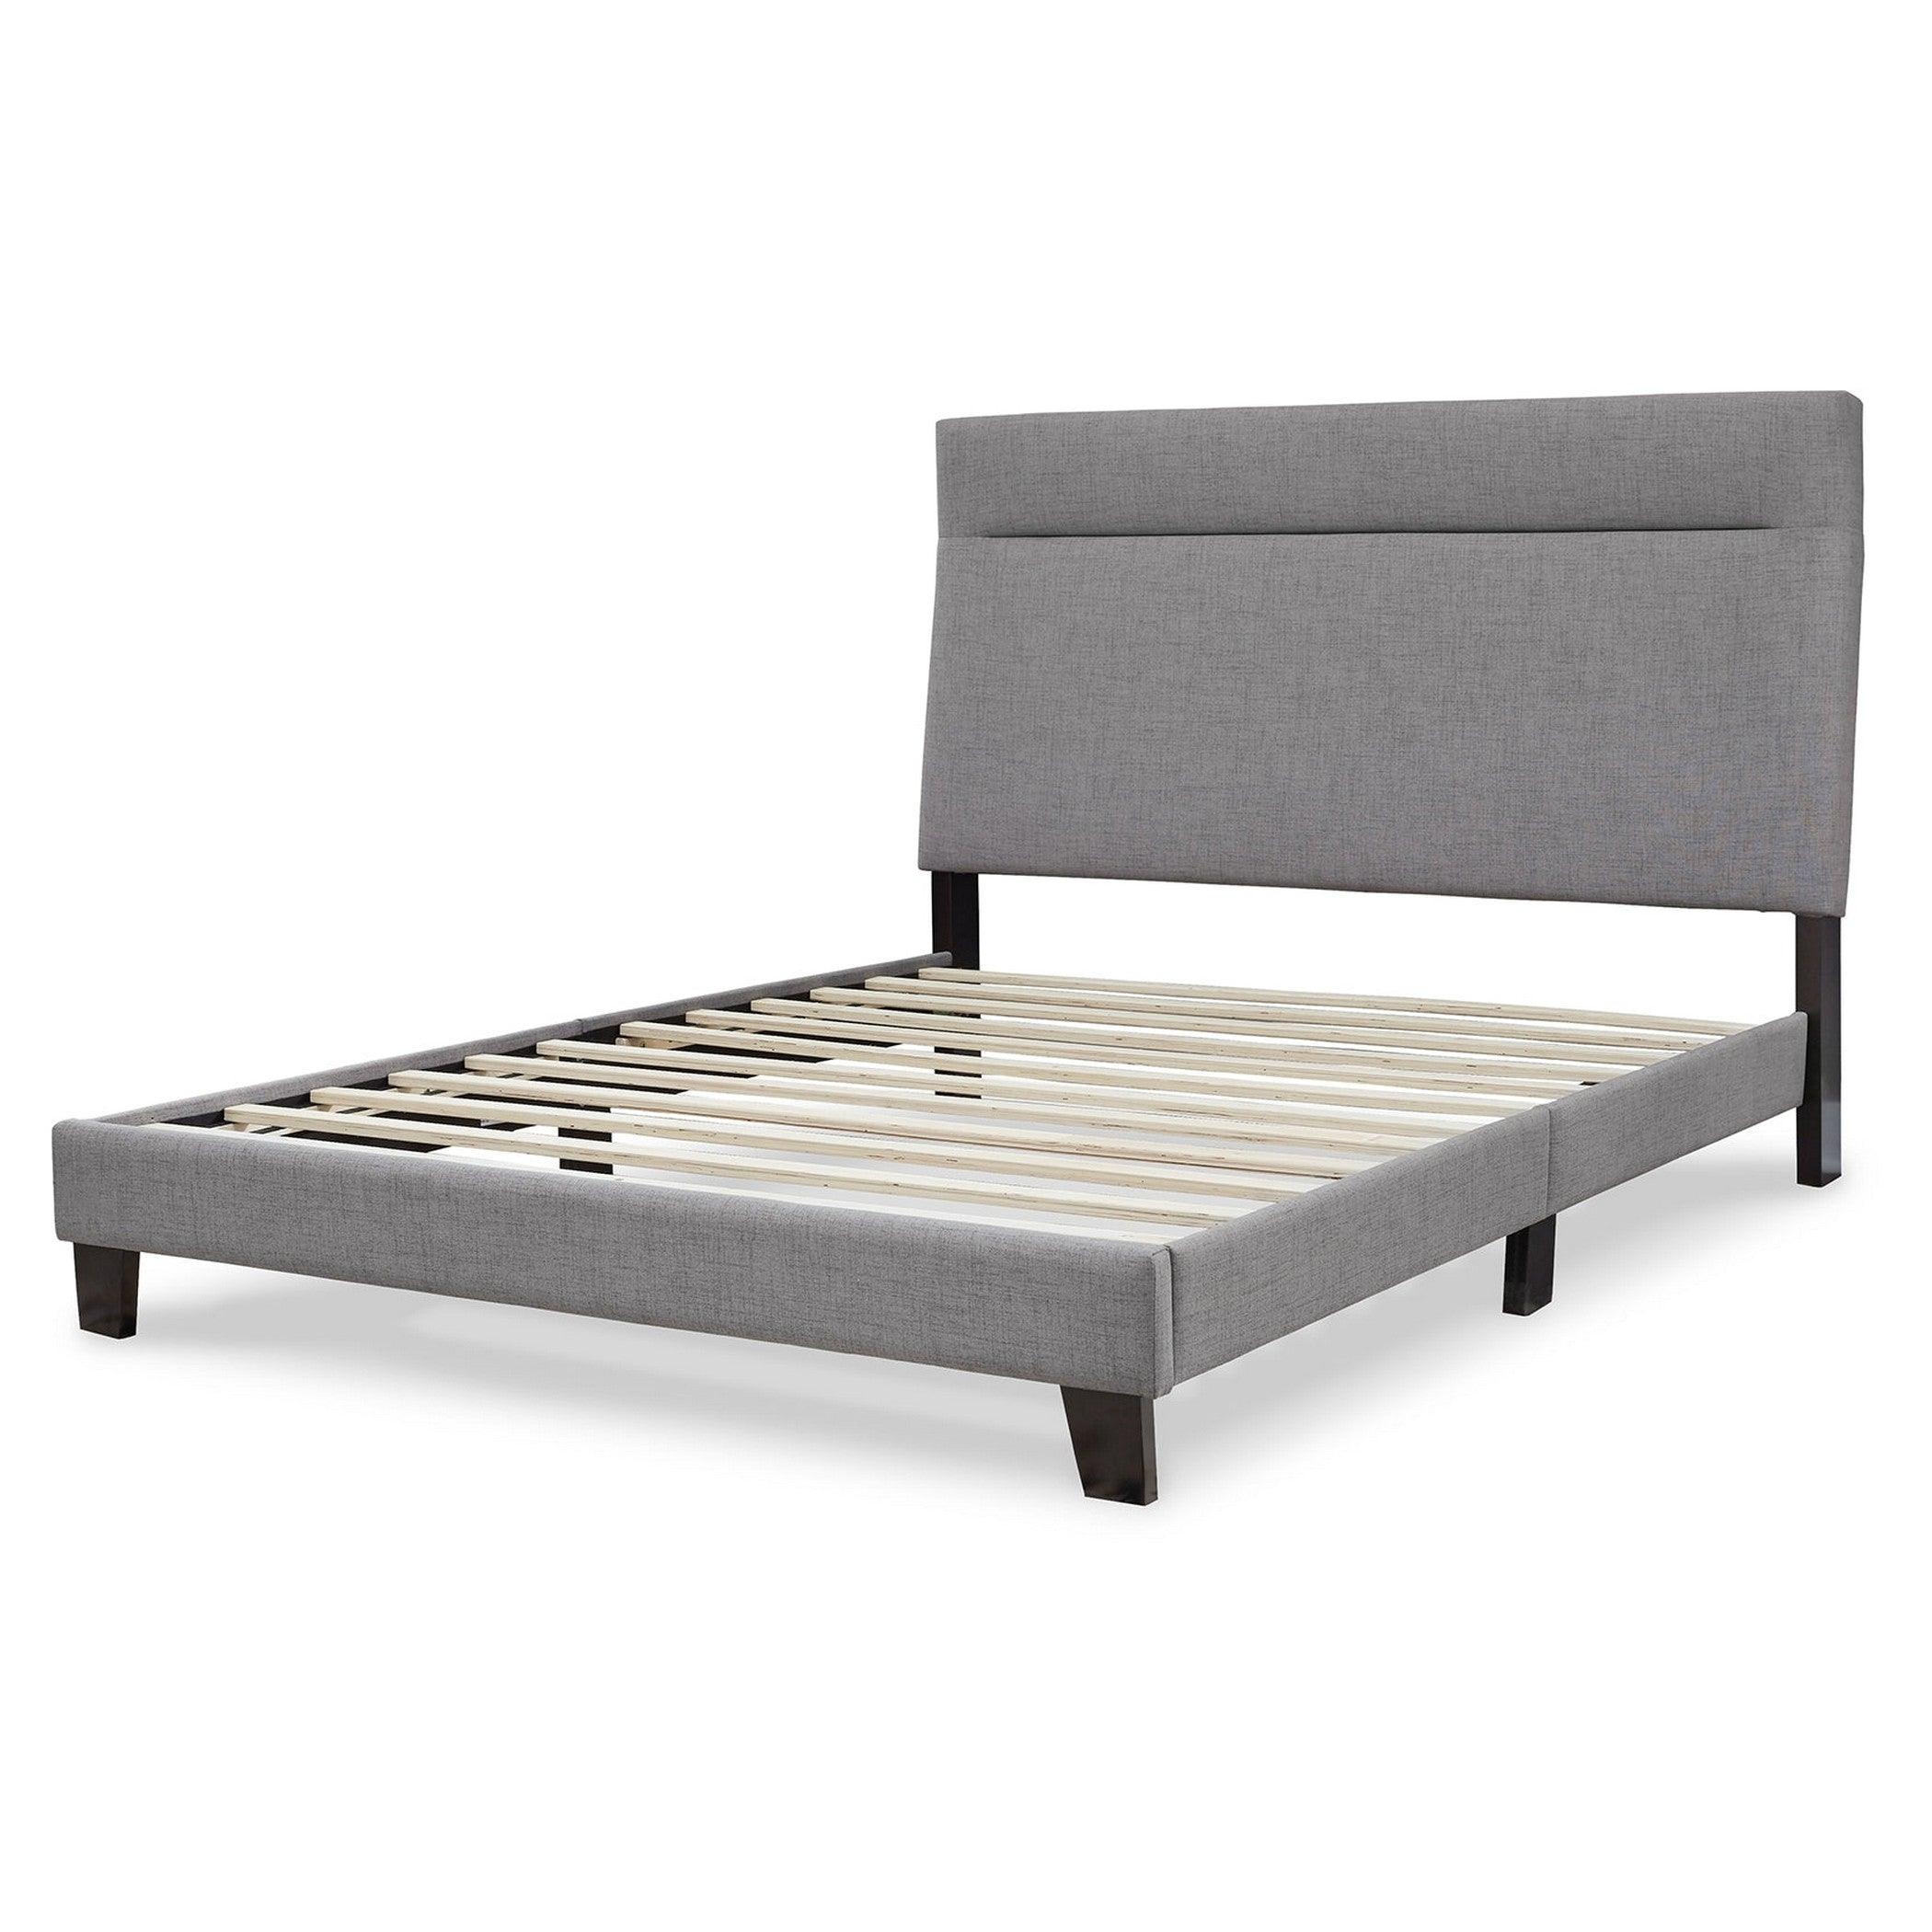 Adelloni Upholstered Bed Simplify your space - Ash-B080-382 - Underkut